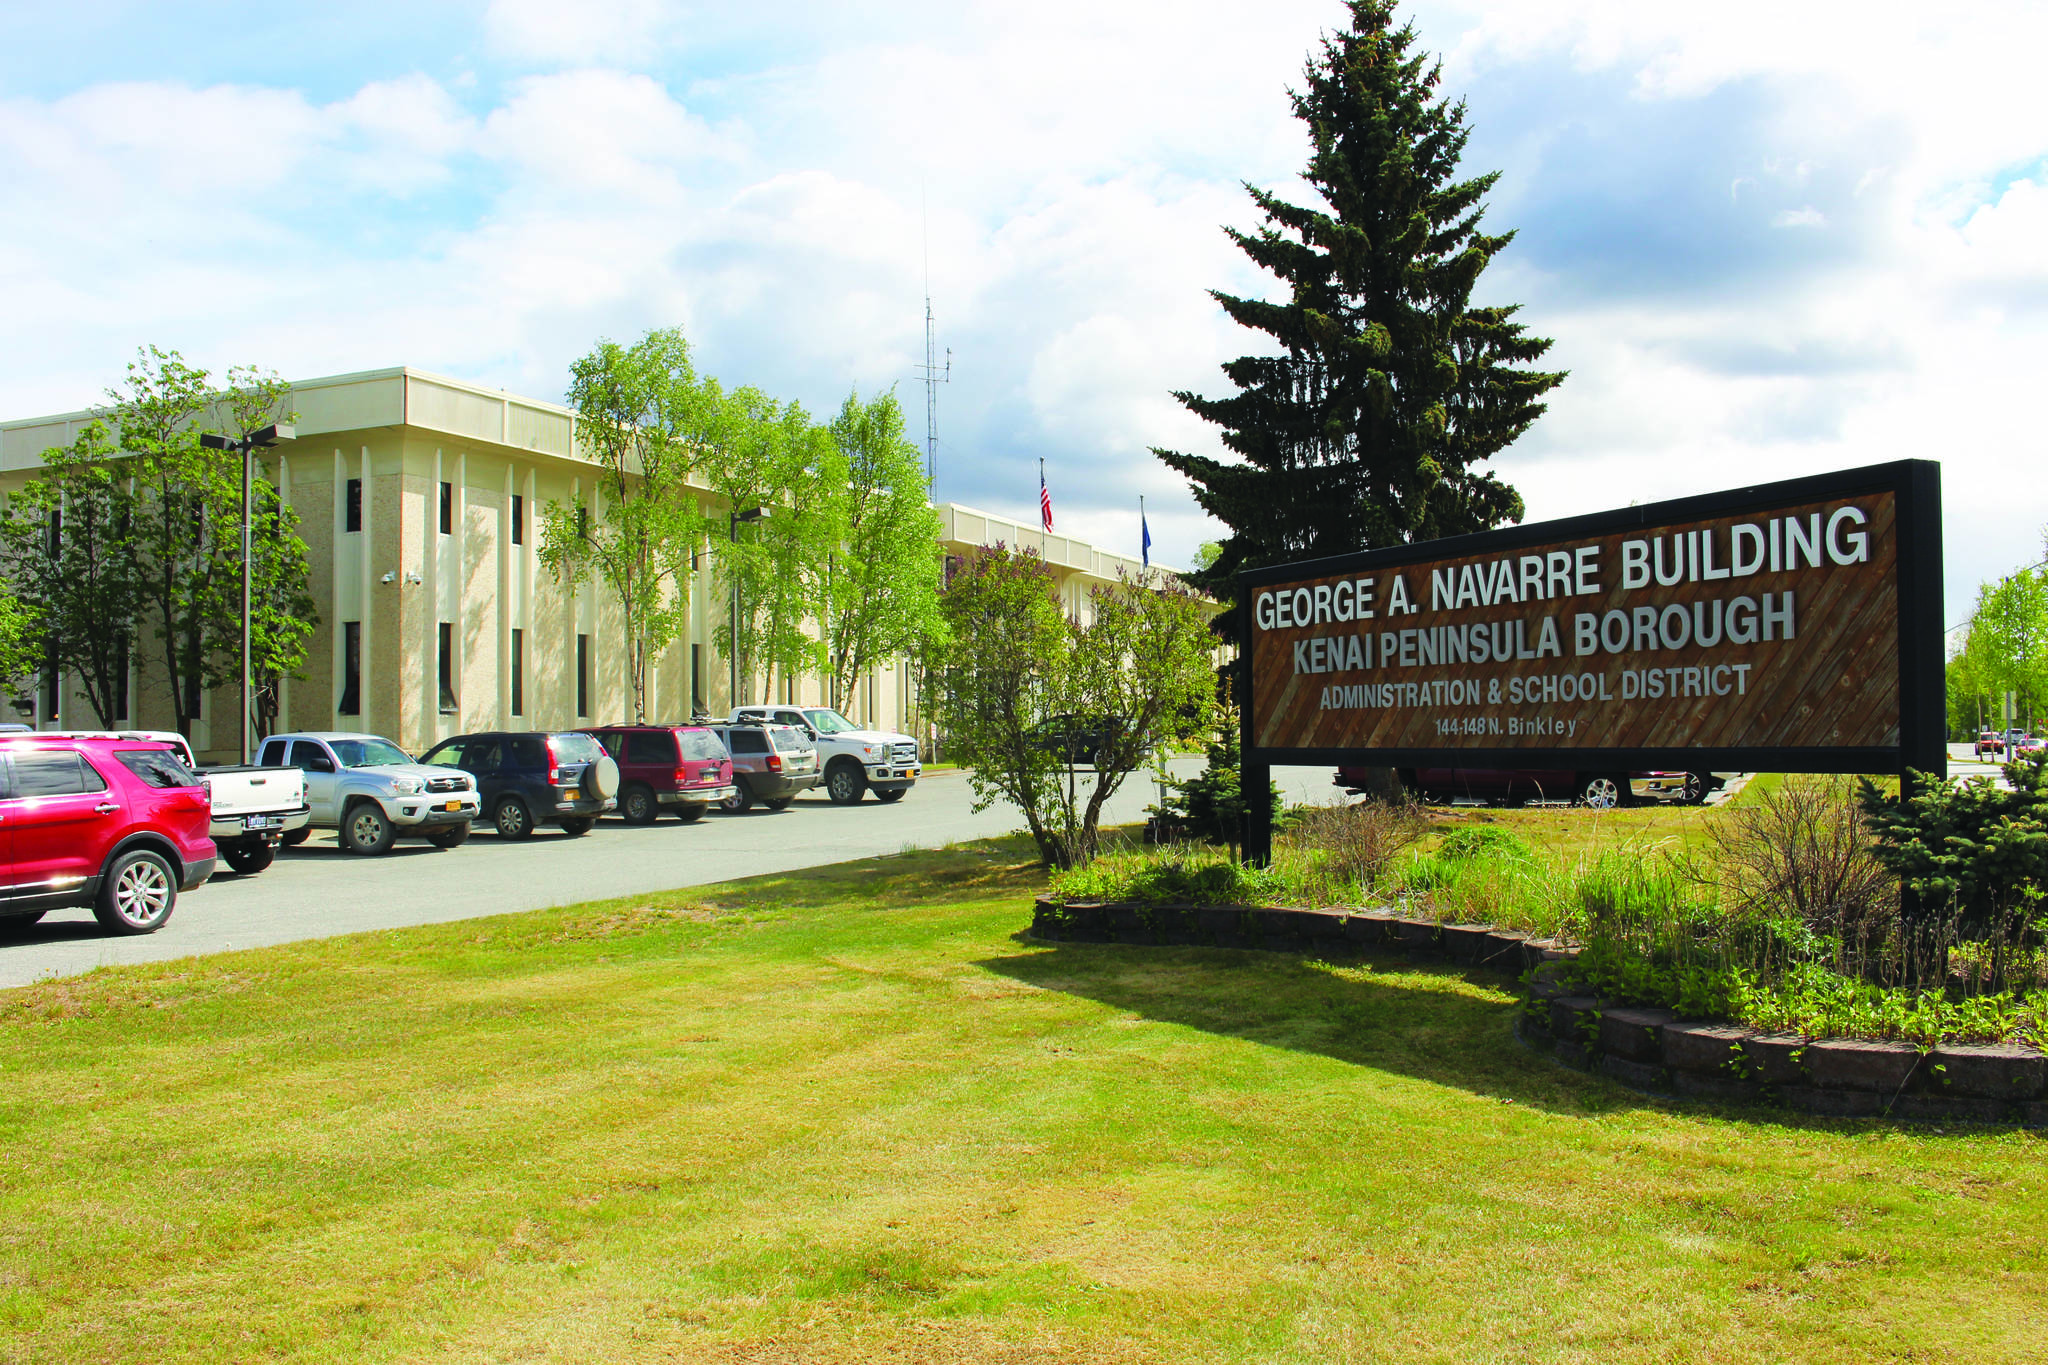 The entrance to the Kenai Peninsula Borough building in Soldotna is seen here on June 1. (Photo by Brian Mazurek/Peninsula Clarion)